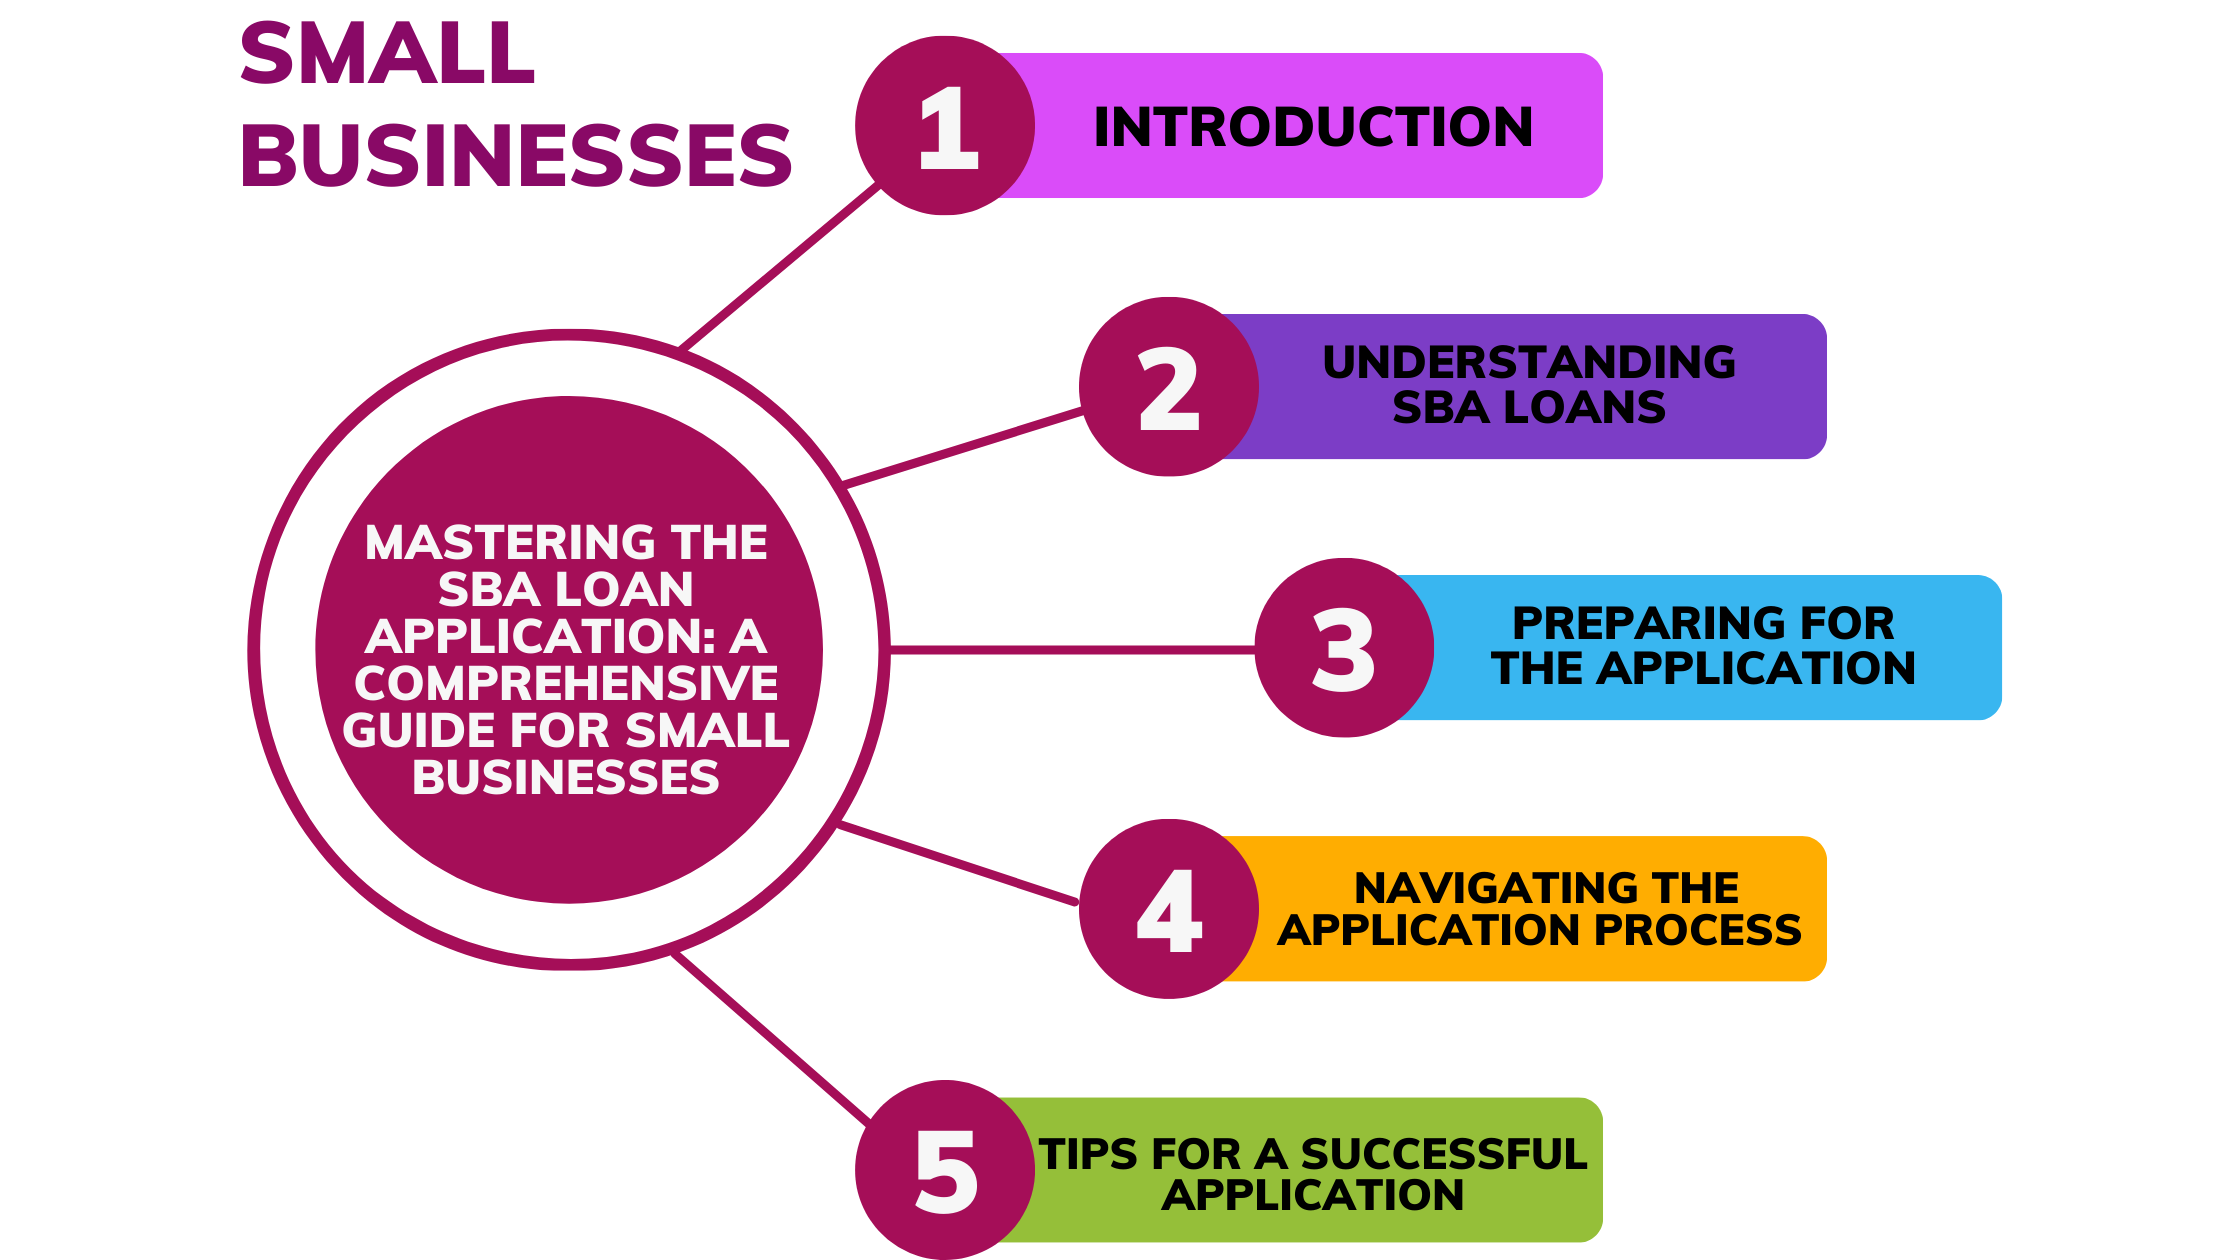 Mastering the SBA Loan Application: A Comprehensive Guide for Small Businesses